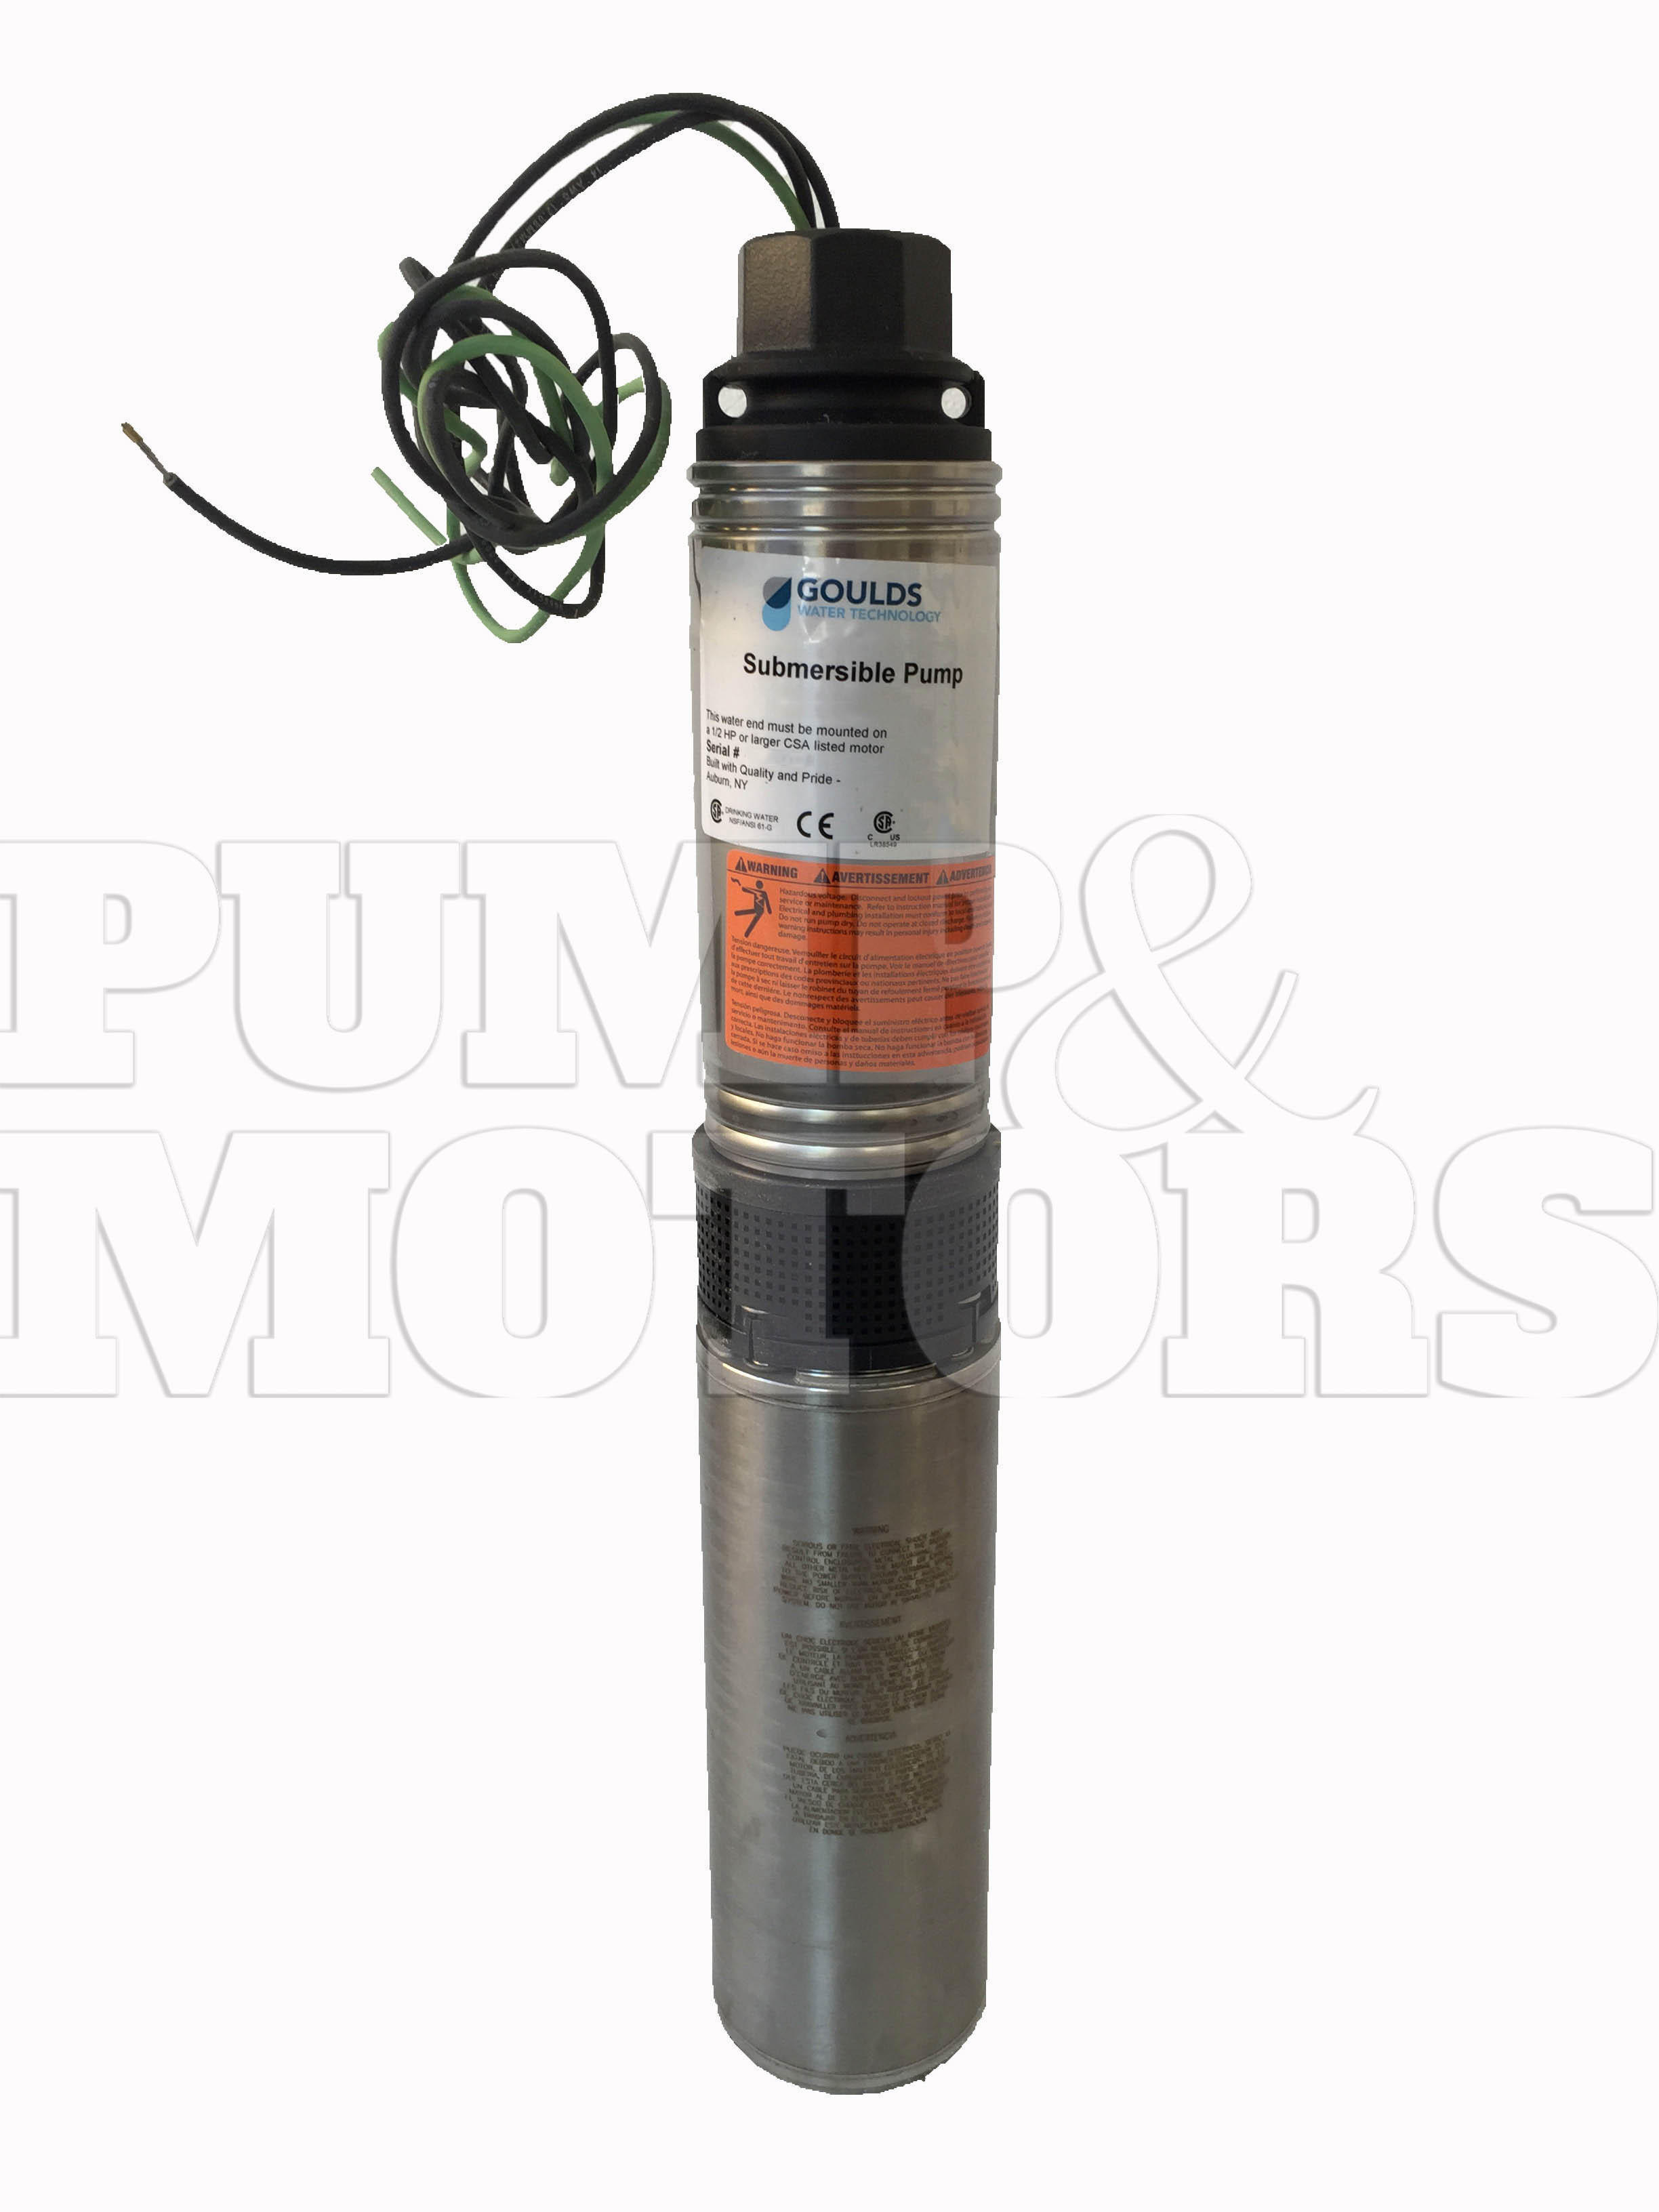 Goulds 18HS15422C 1.5HP 230V Submersible Water Well Pump 18GPM